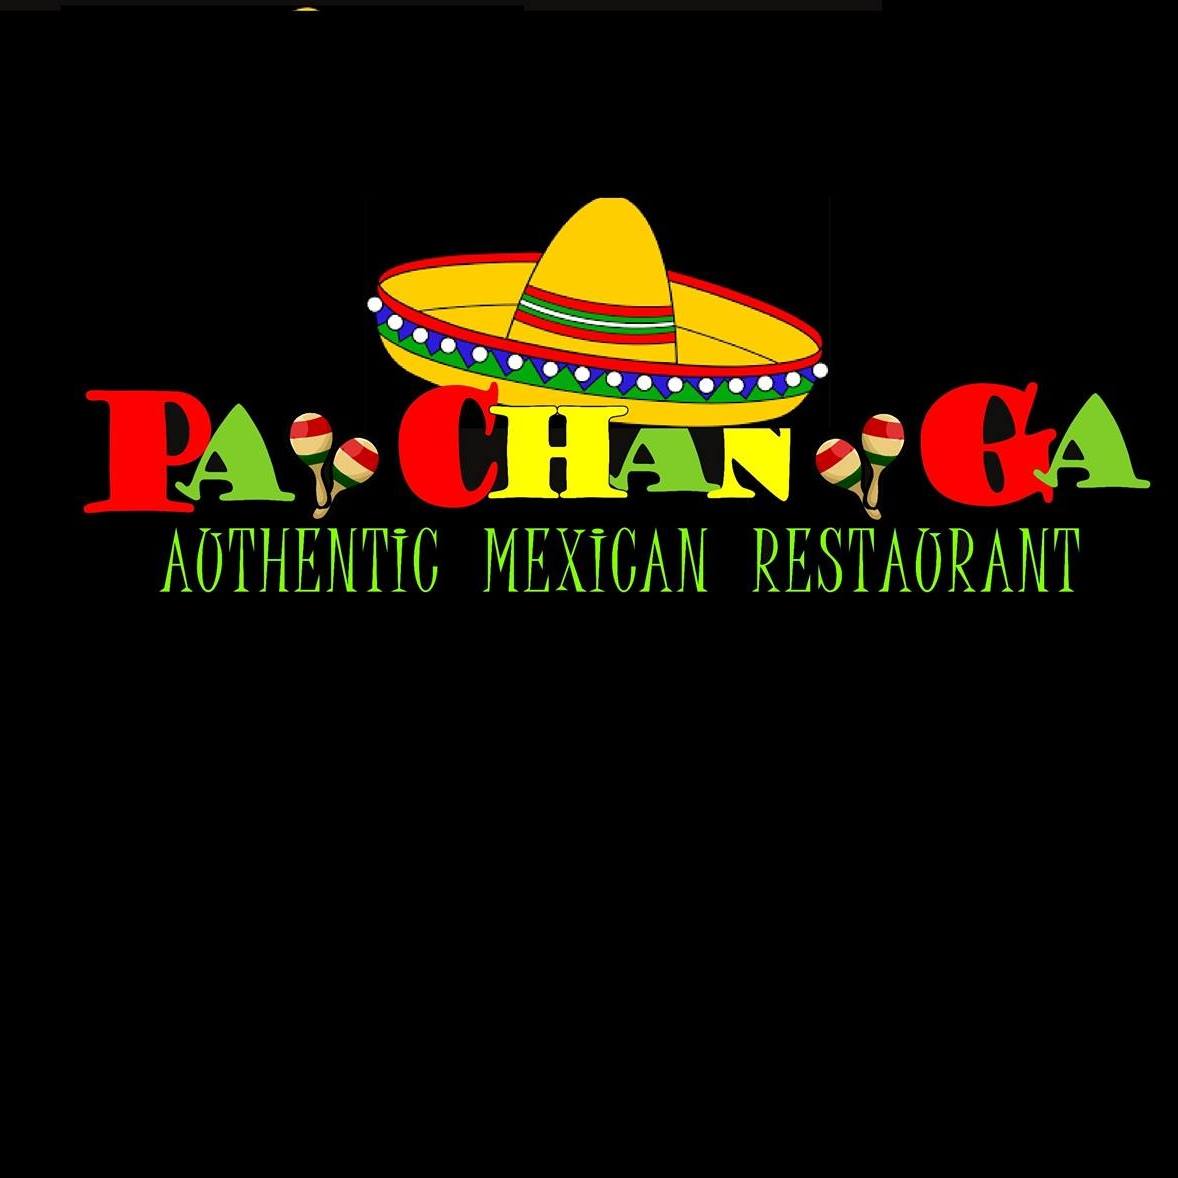 Pa-Chan-Ga Authentic Mexican Restaurant